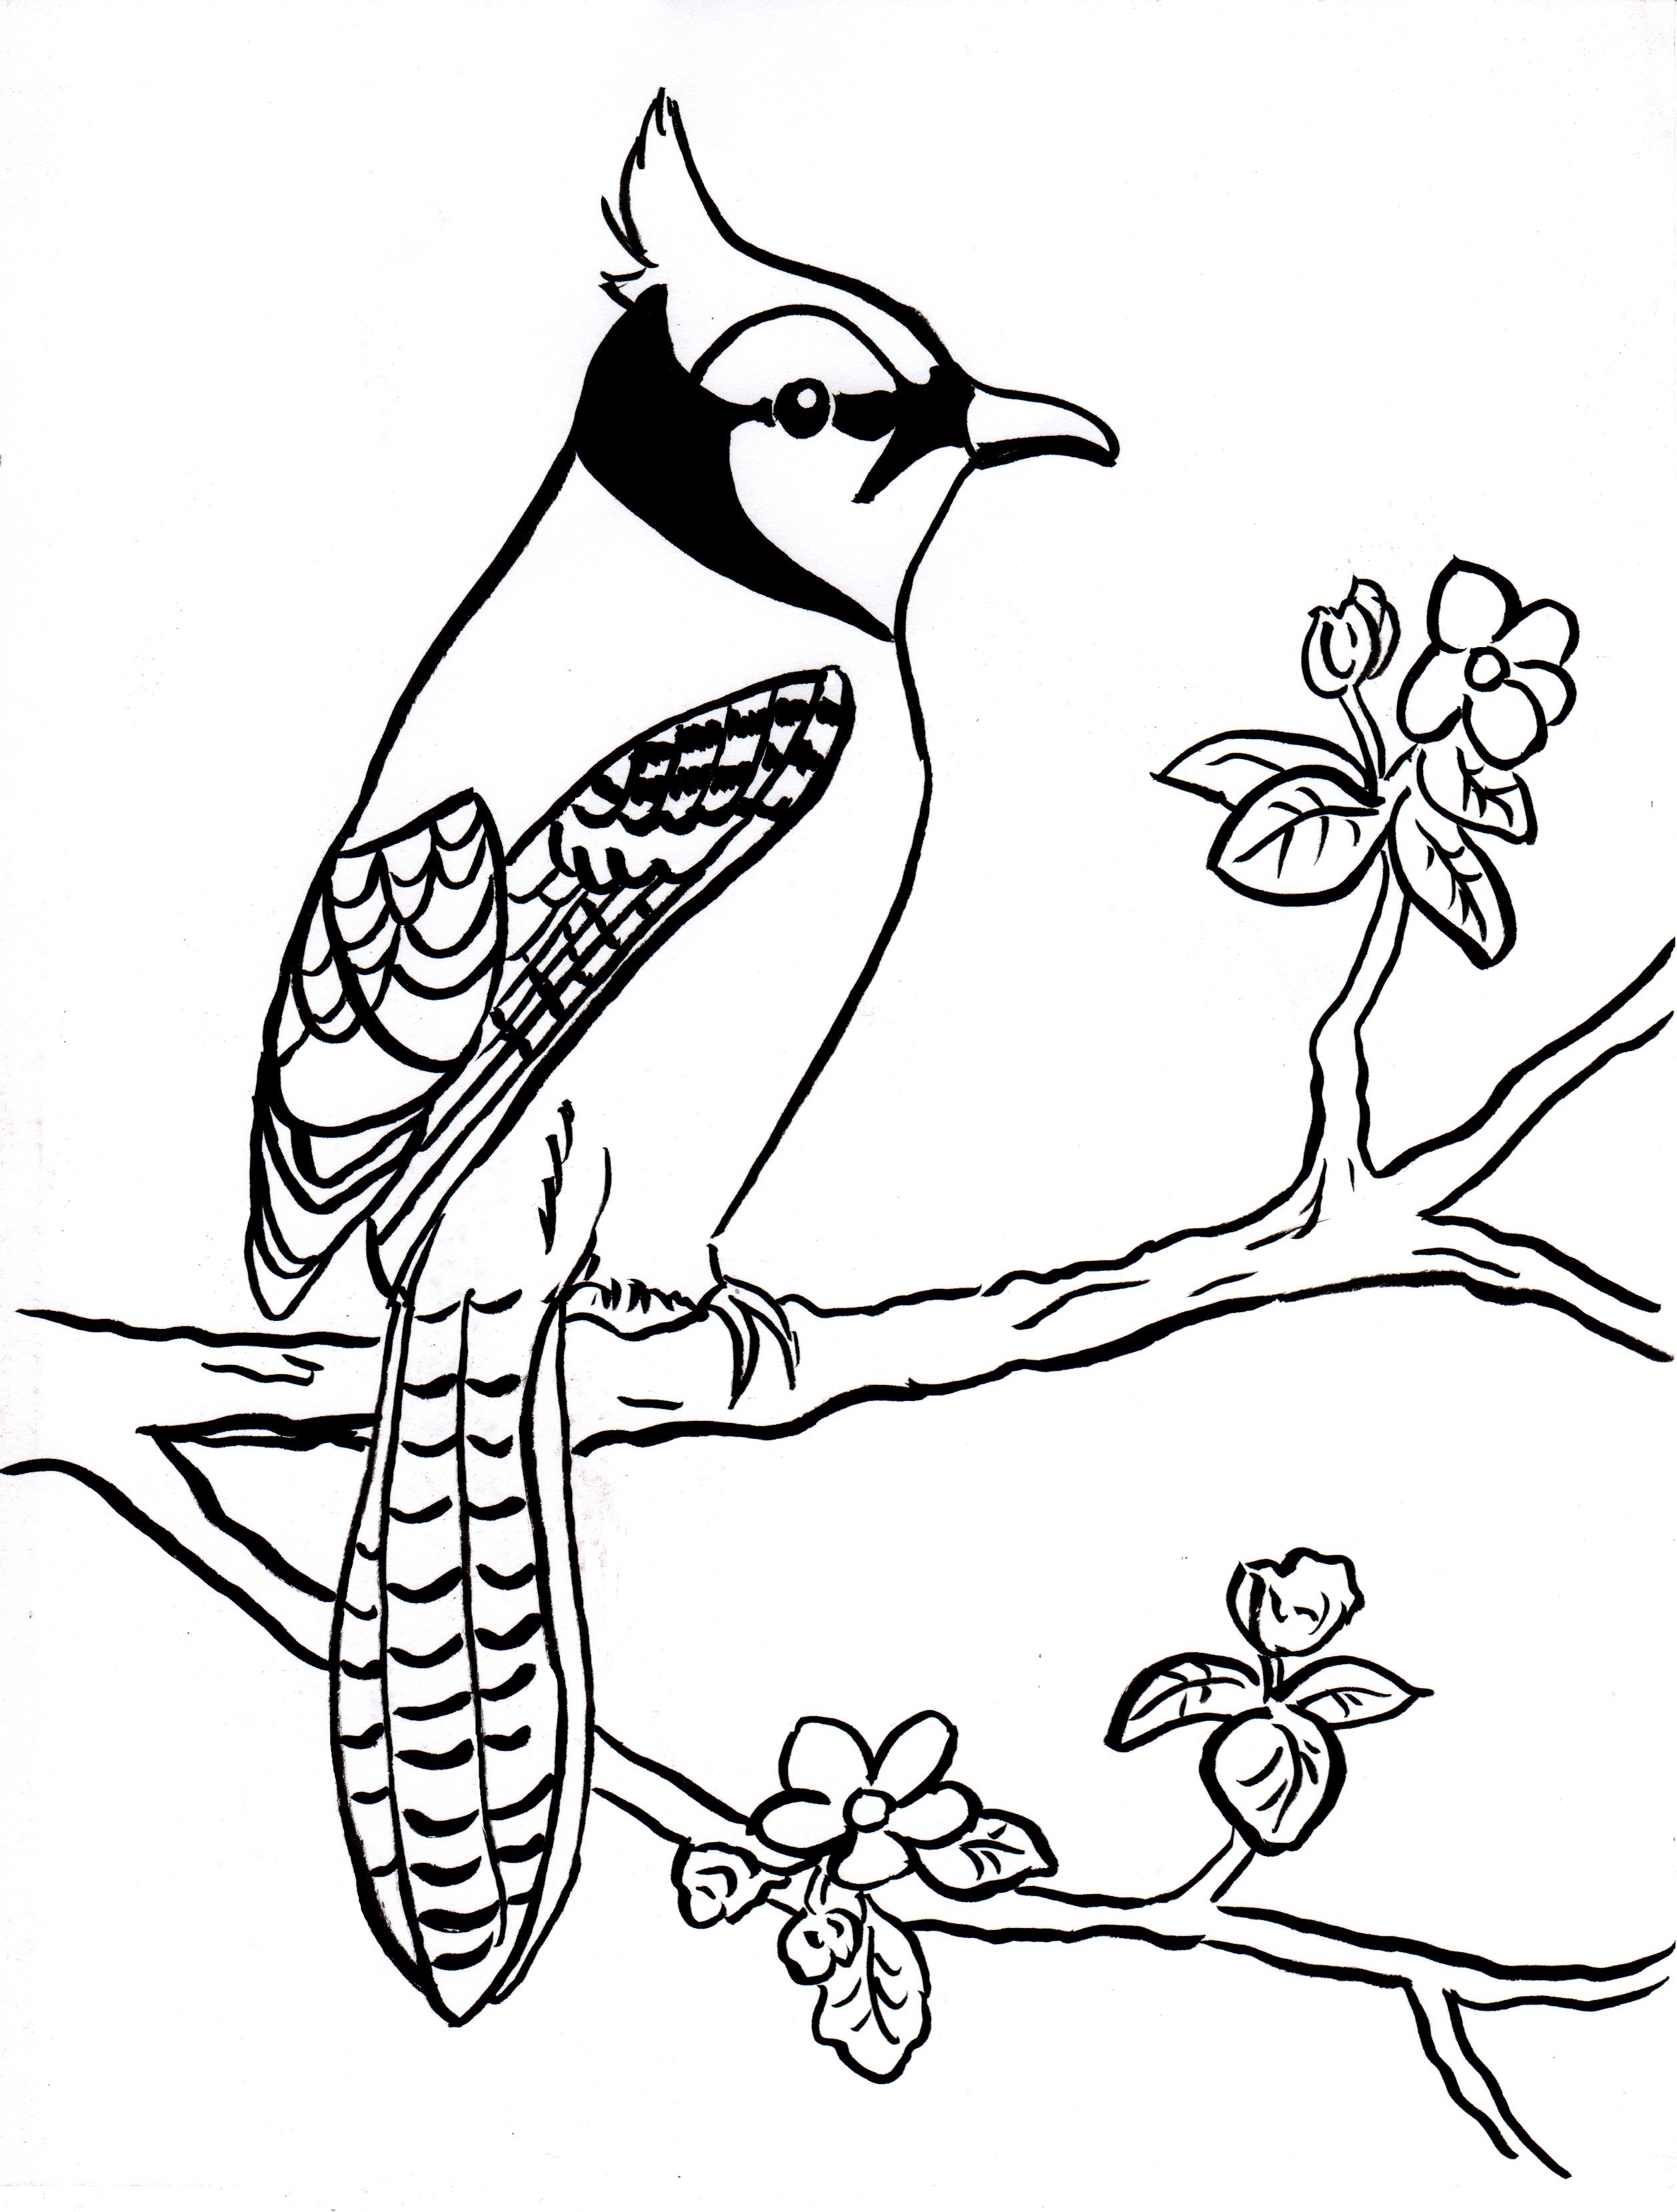 Blue Jay Coloring Page   Art Starts